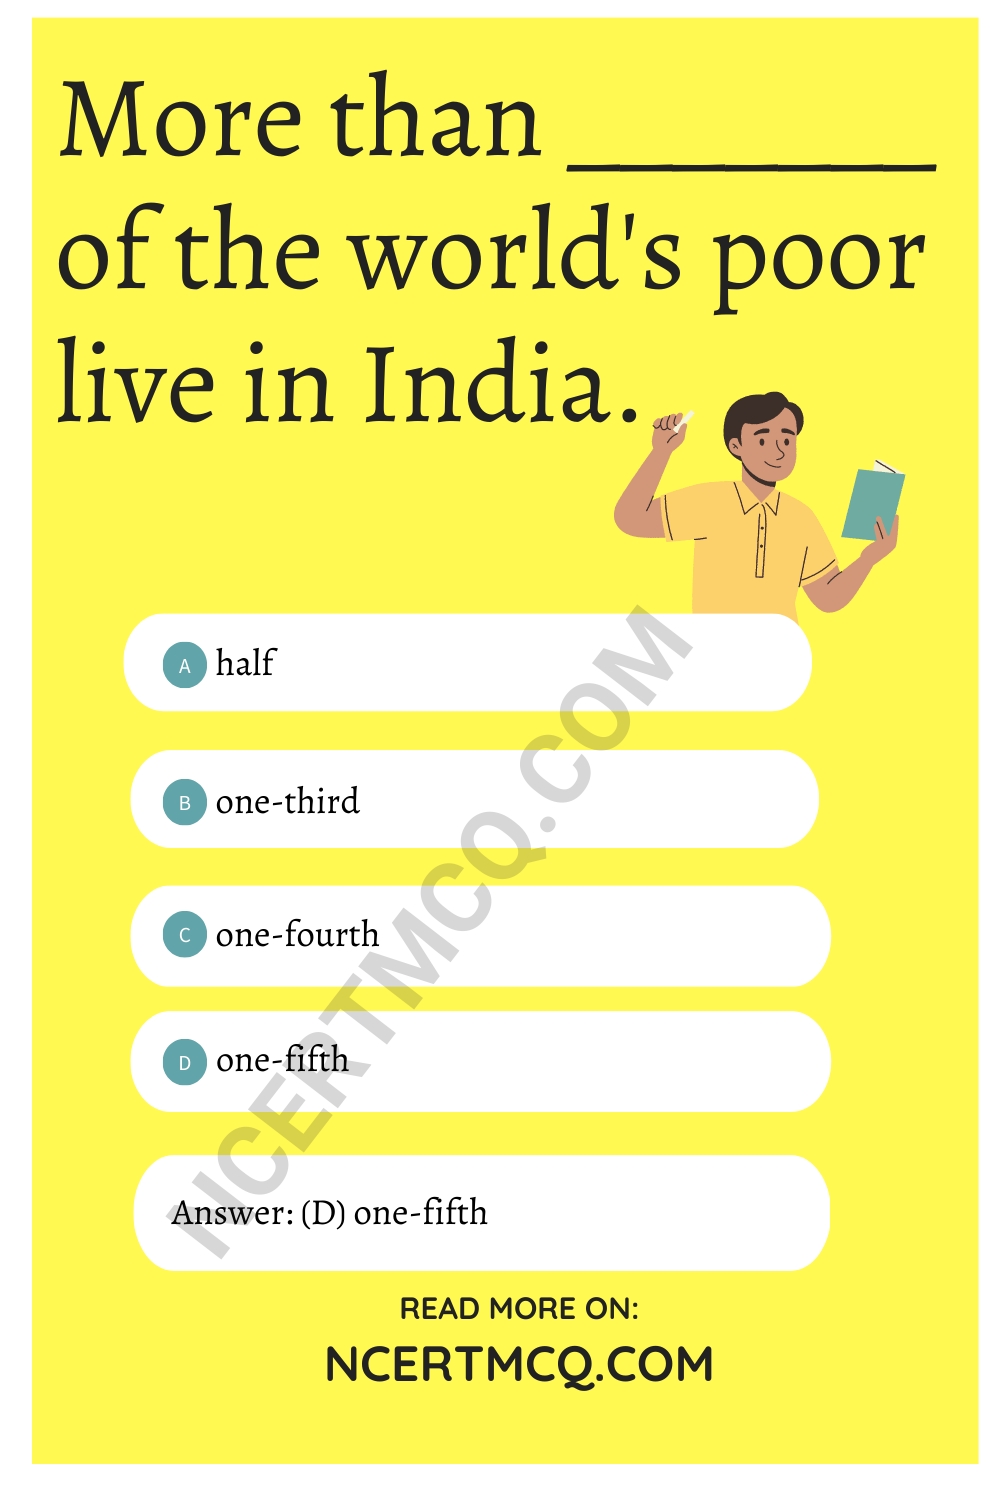 More than _______ of the world's poor live in India.